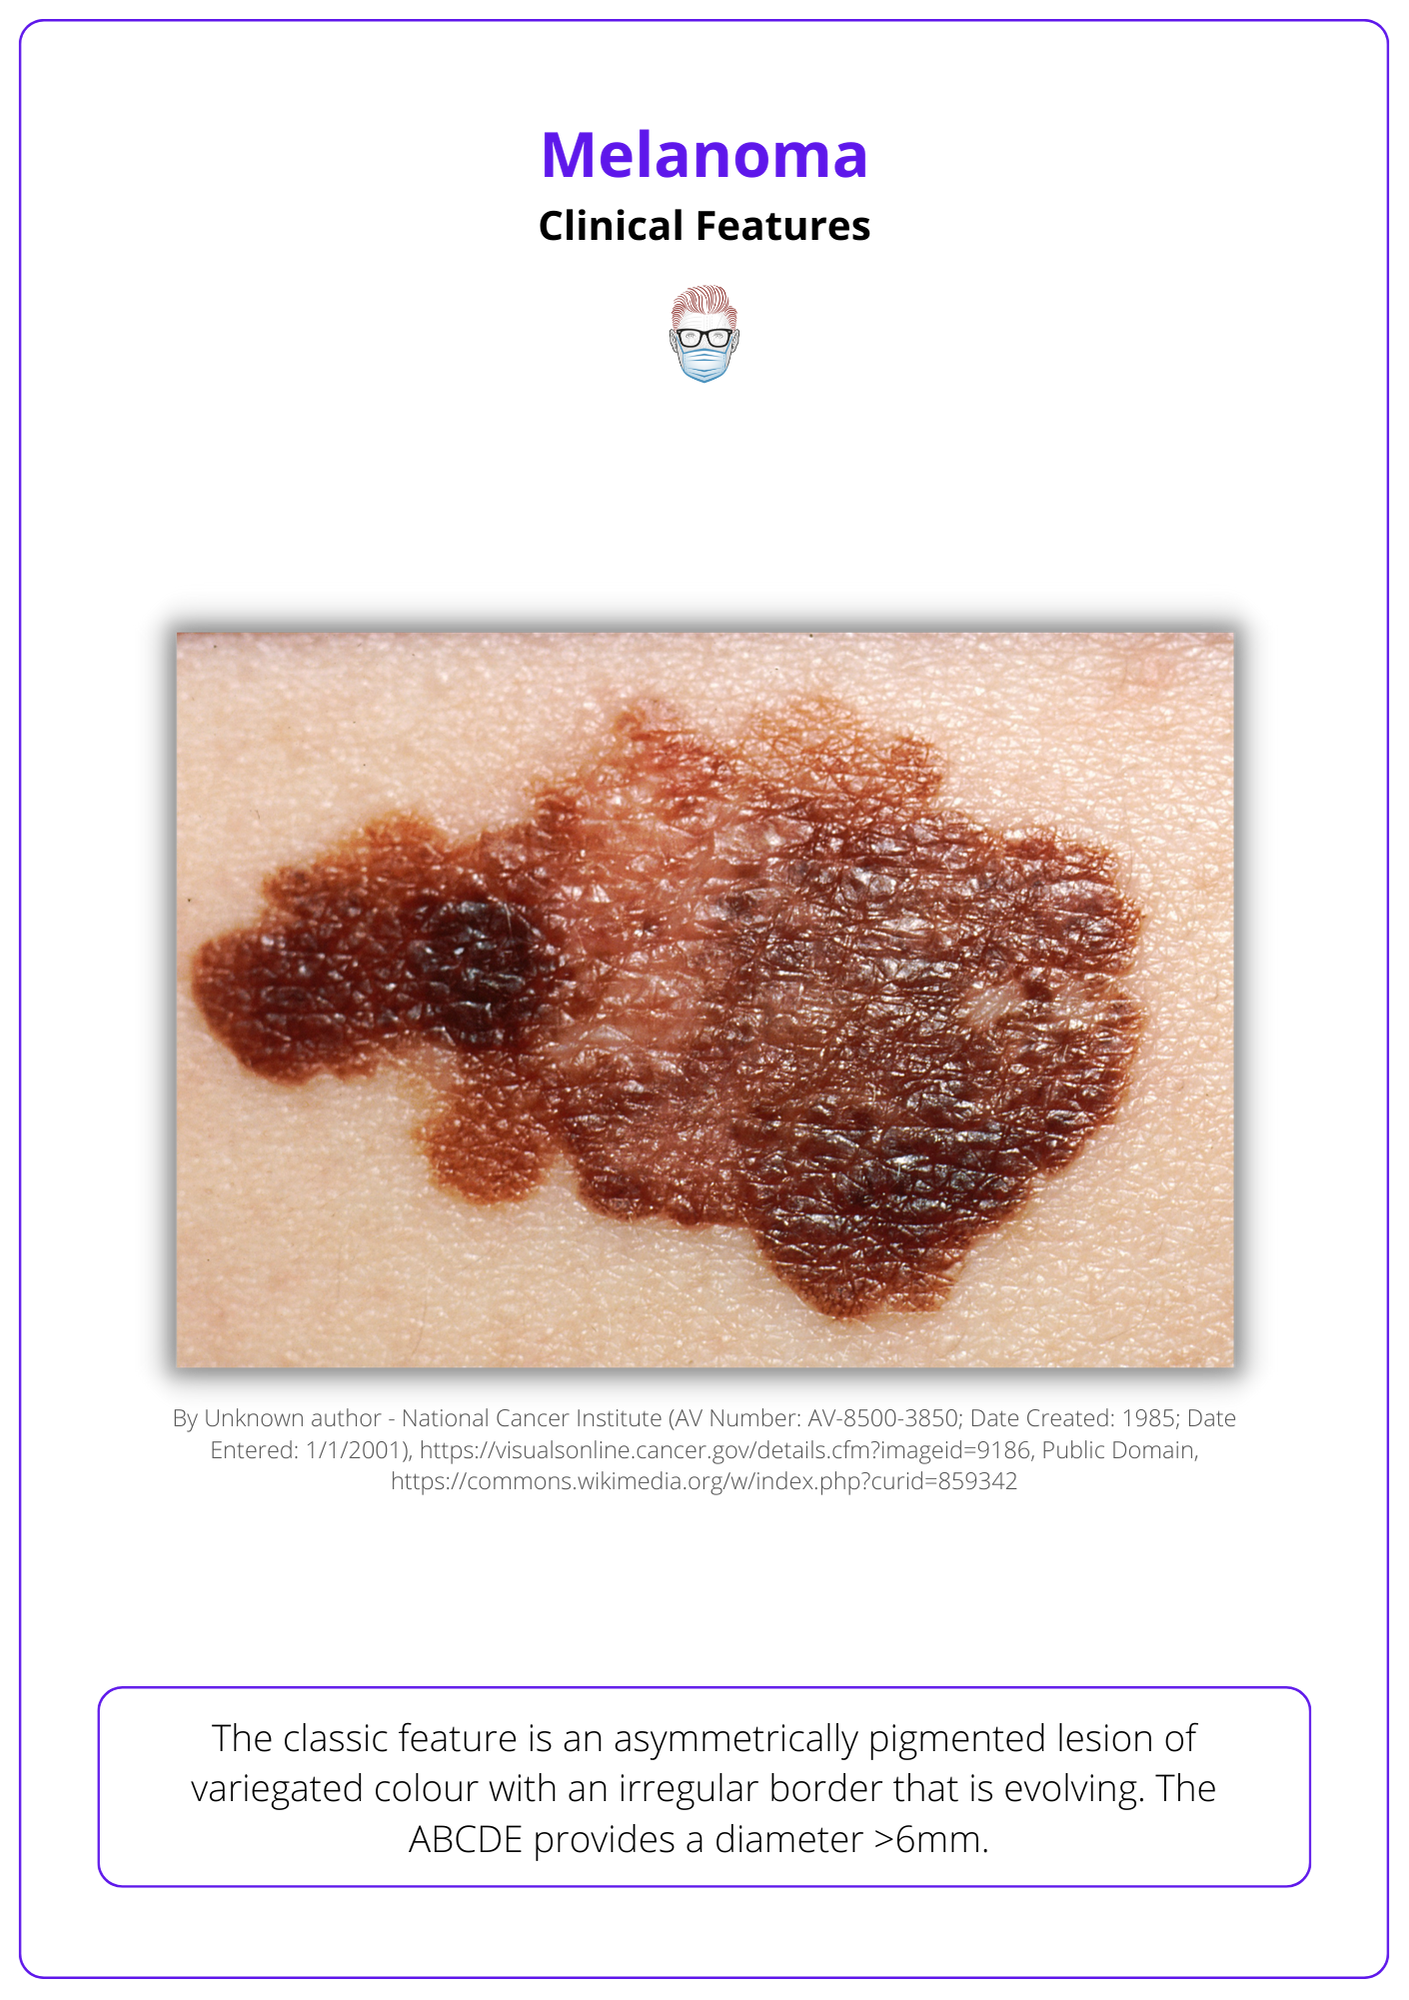 This image shows Clinical Features of Melanoma.